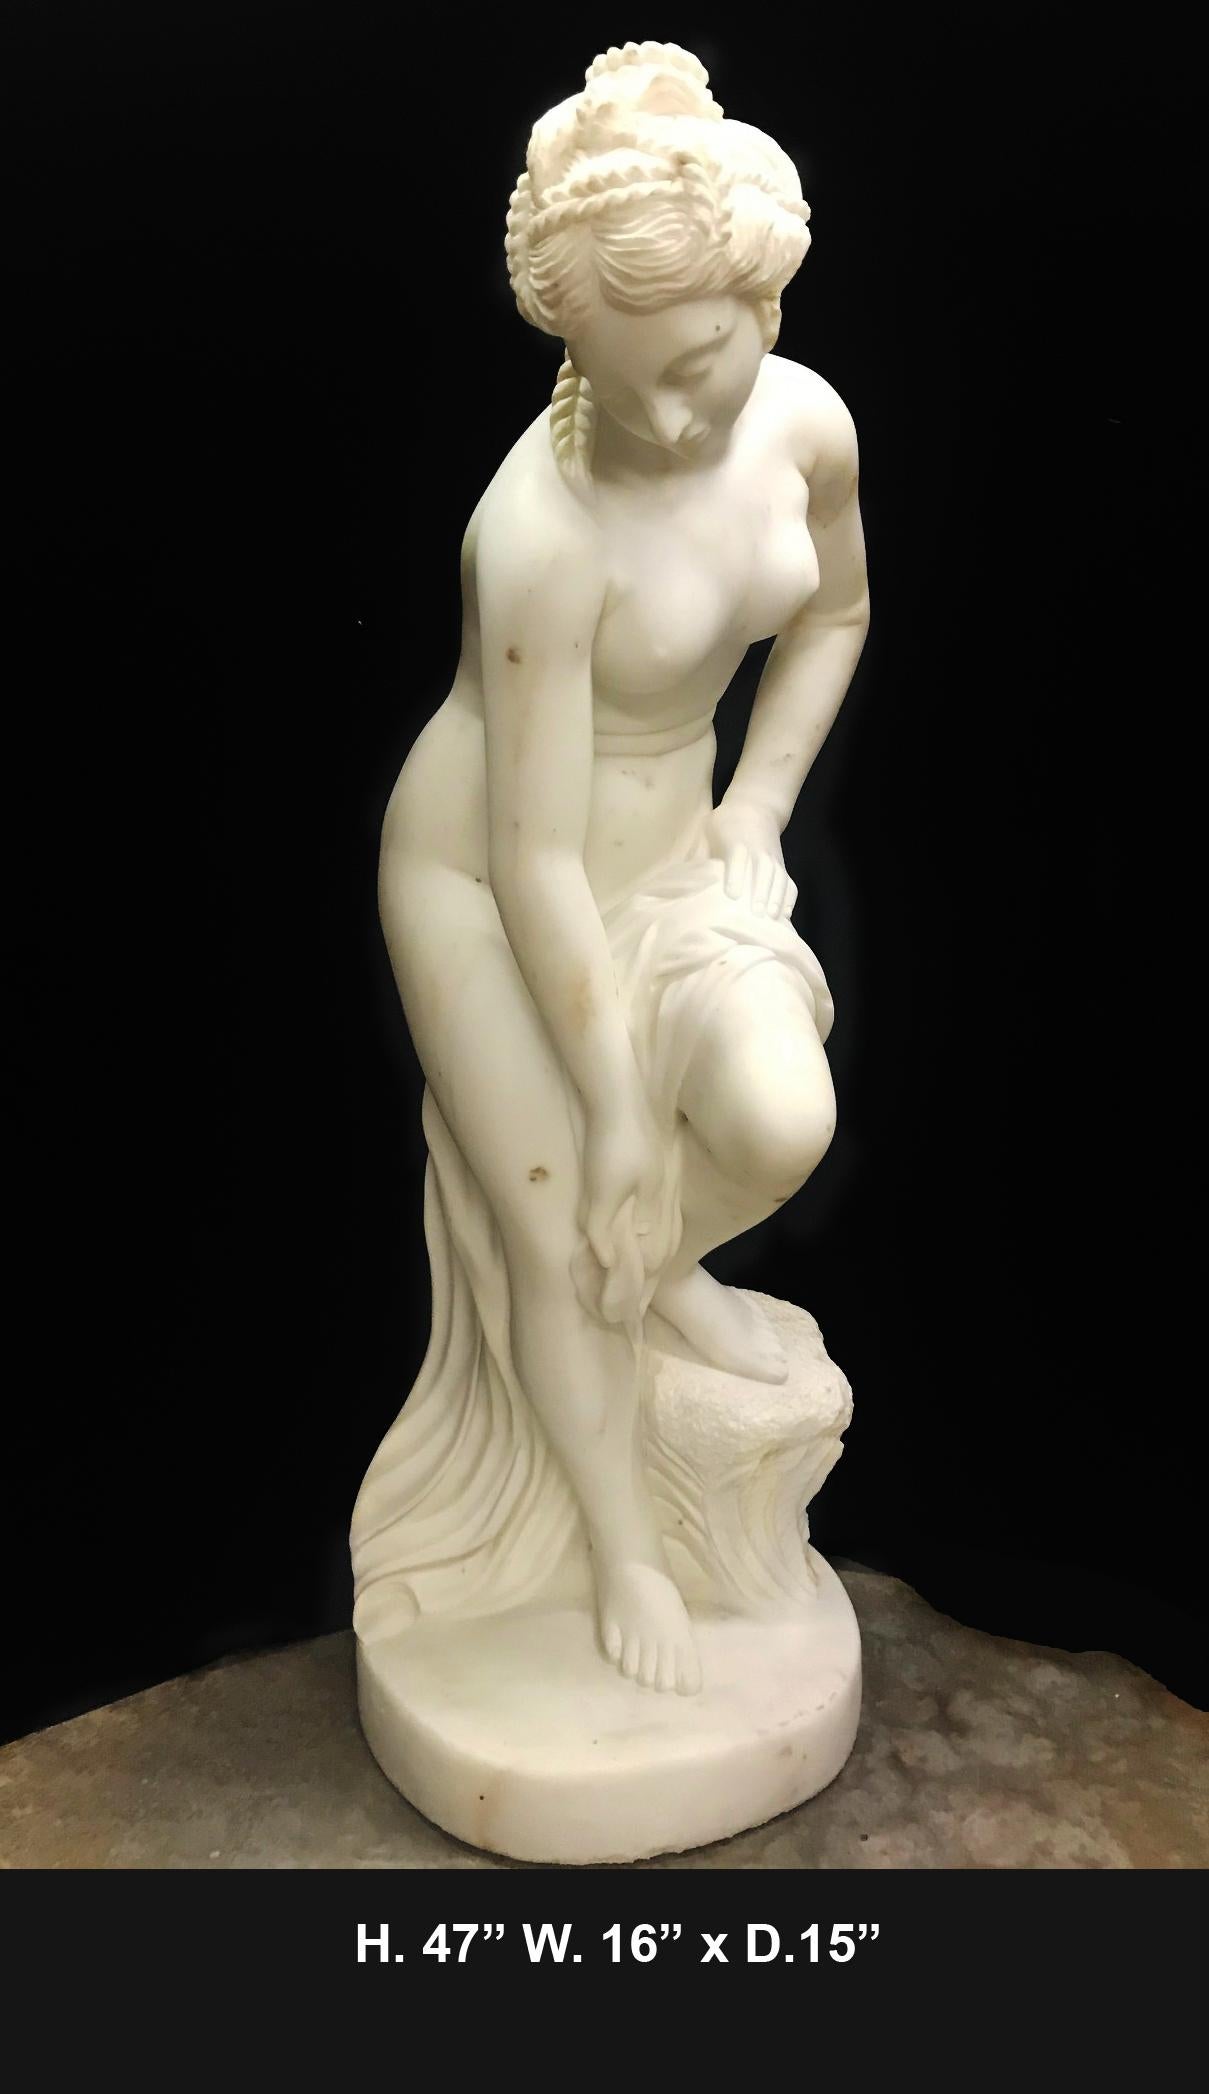 Lovely French finely carved white marble figure of Nude Diana after bath,
mid-20th century. 

Nude Diana is leaning near a tree stump, her hair tied with a string of pearls, raised on oval marble plinth. Meticulous attention was given to the